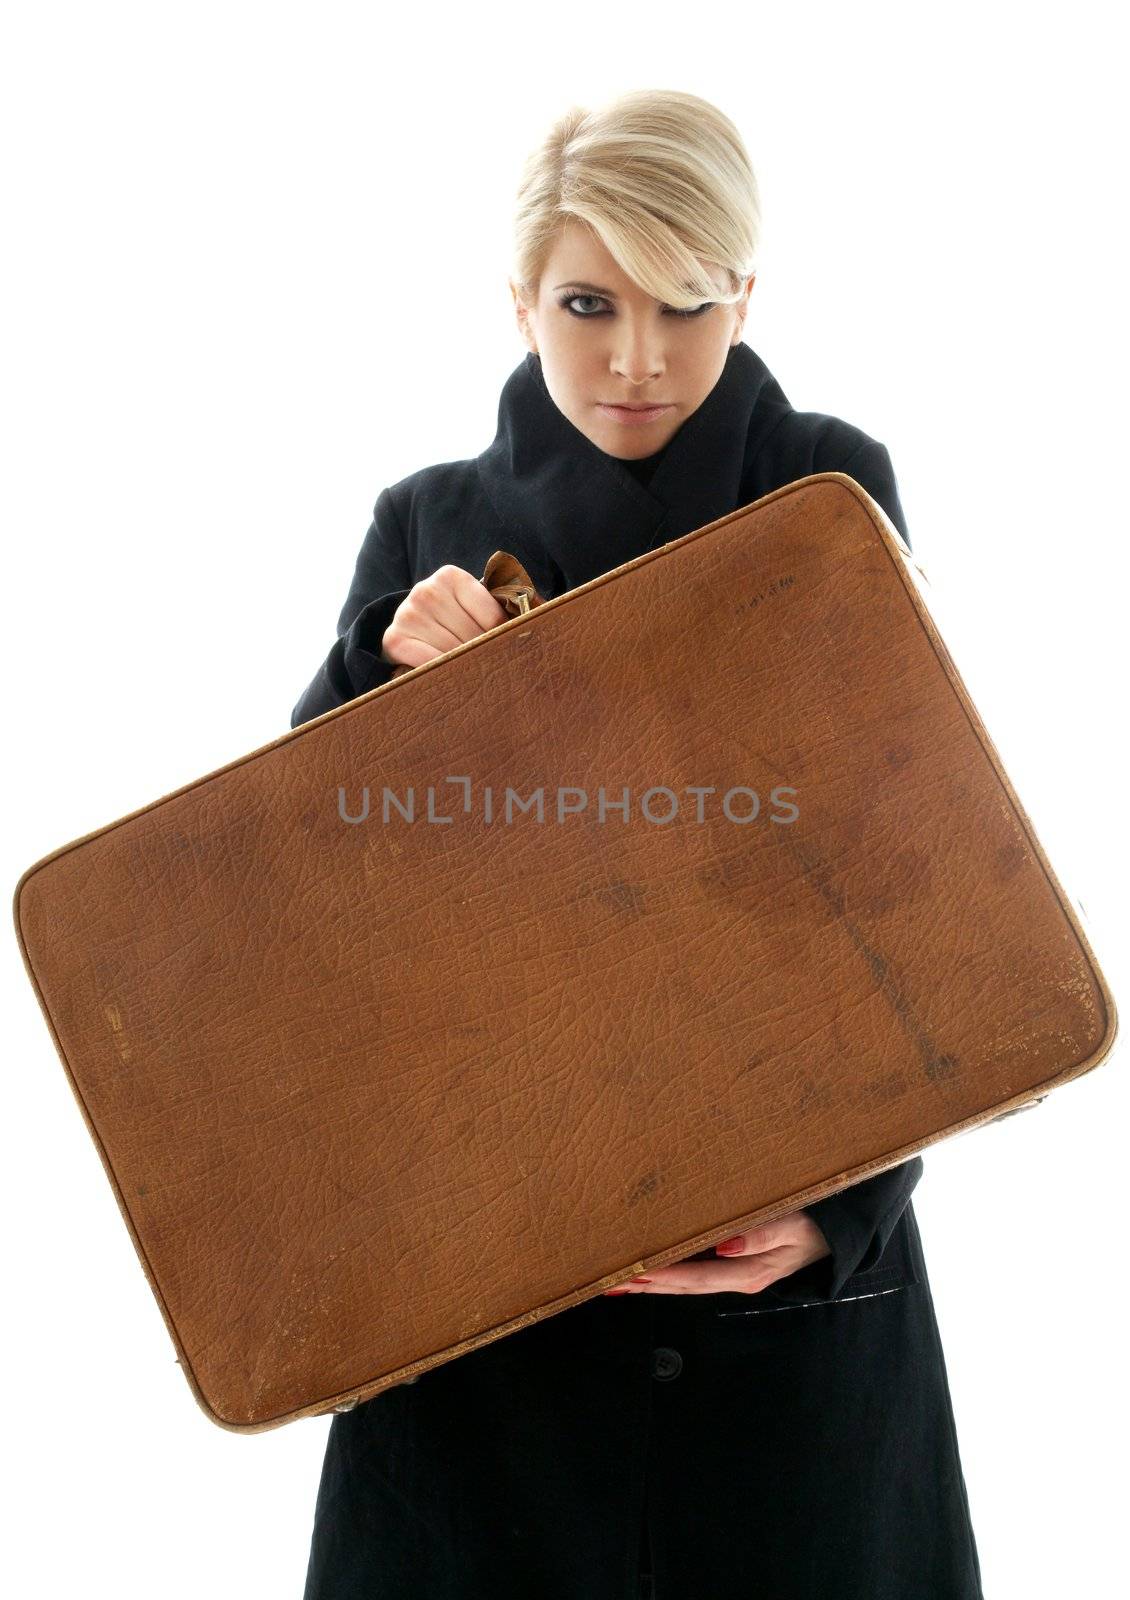 aggressive blond showing big brown suitcase over white background